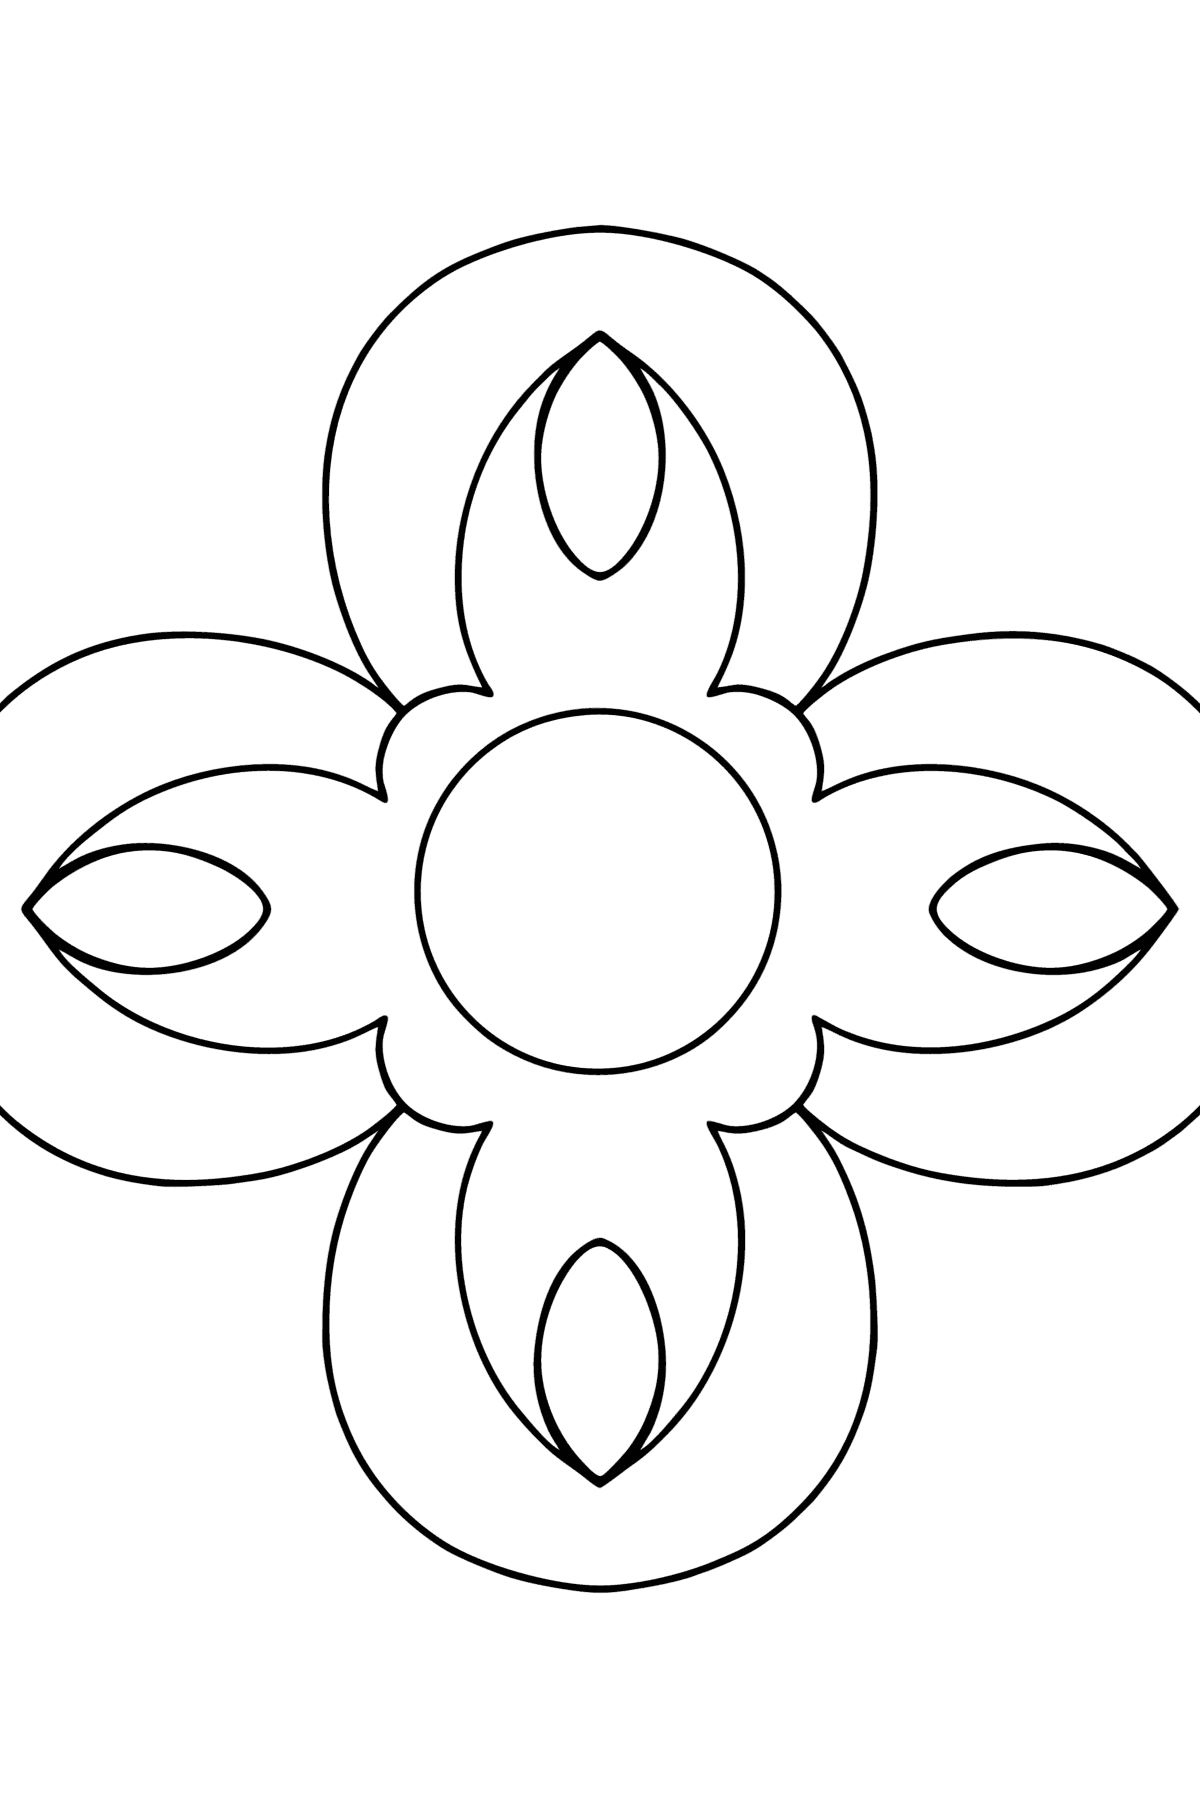 Coloring book for kids - Anti stress flower - Coloring Pages for Kids